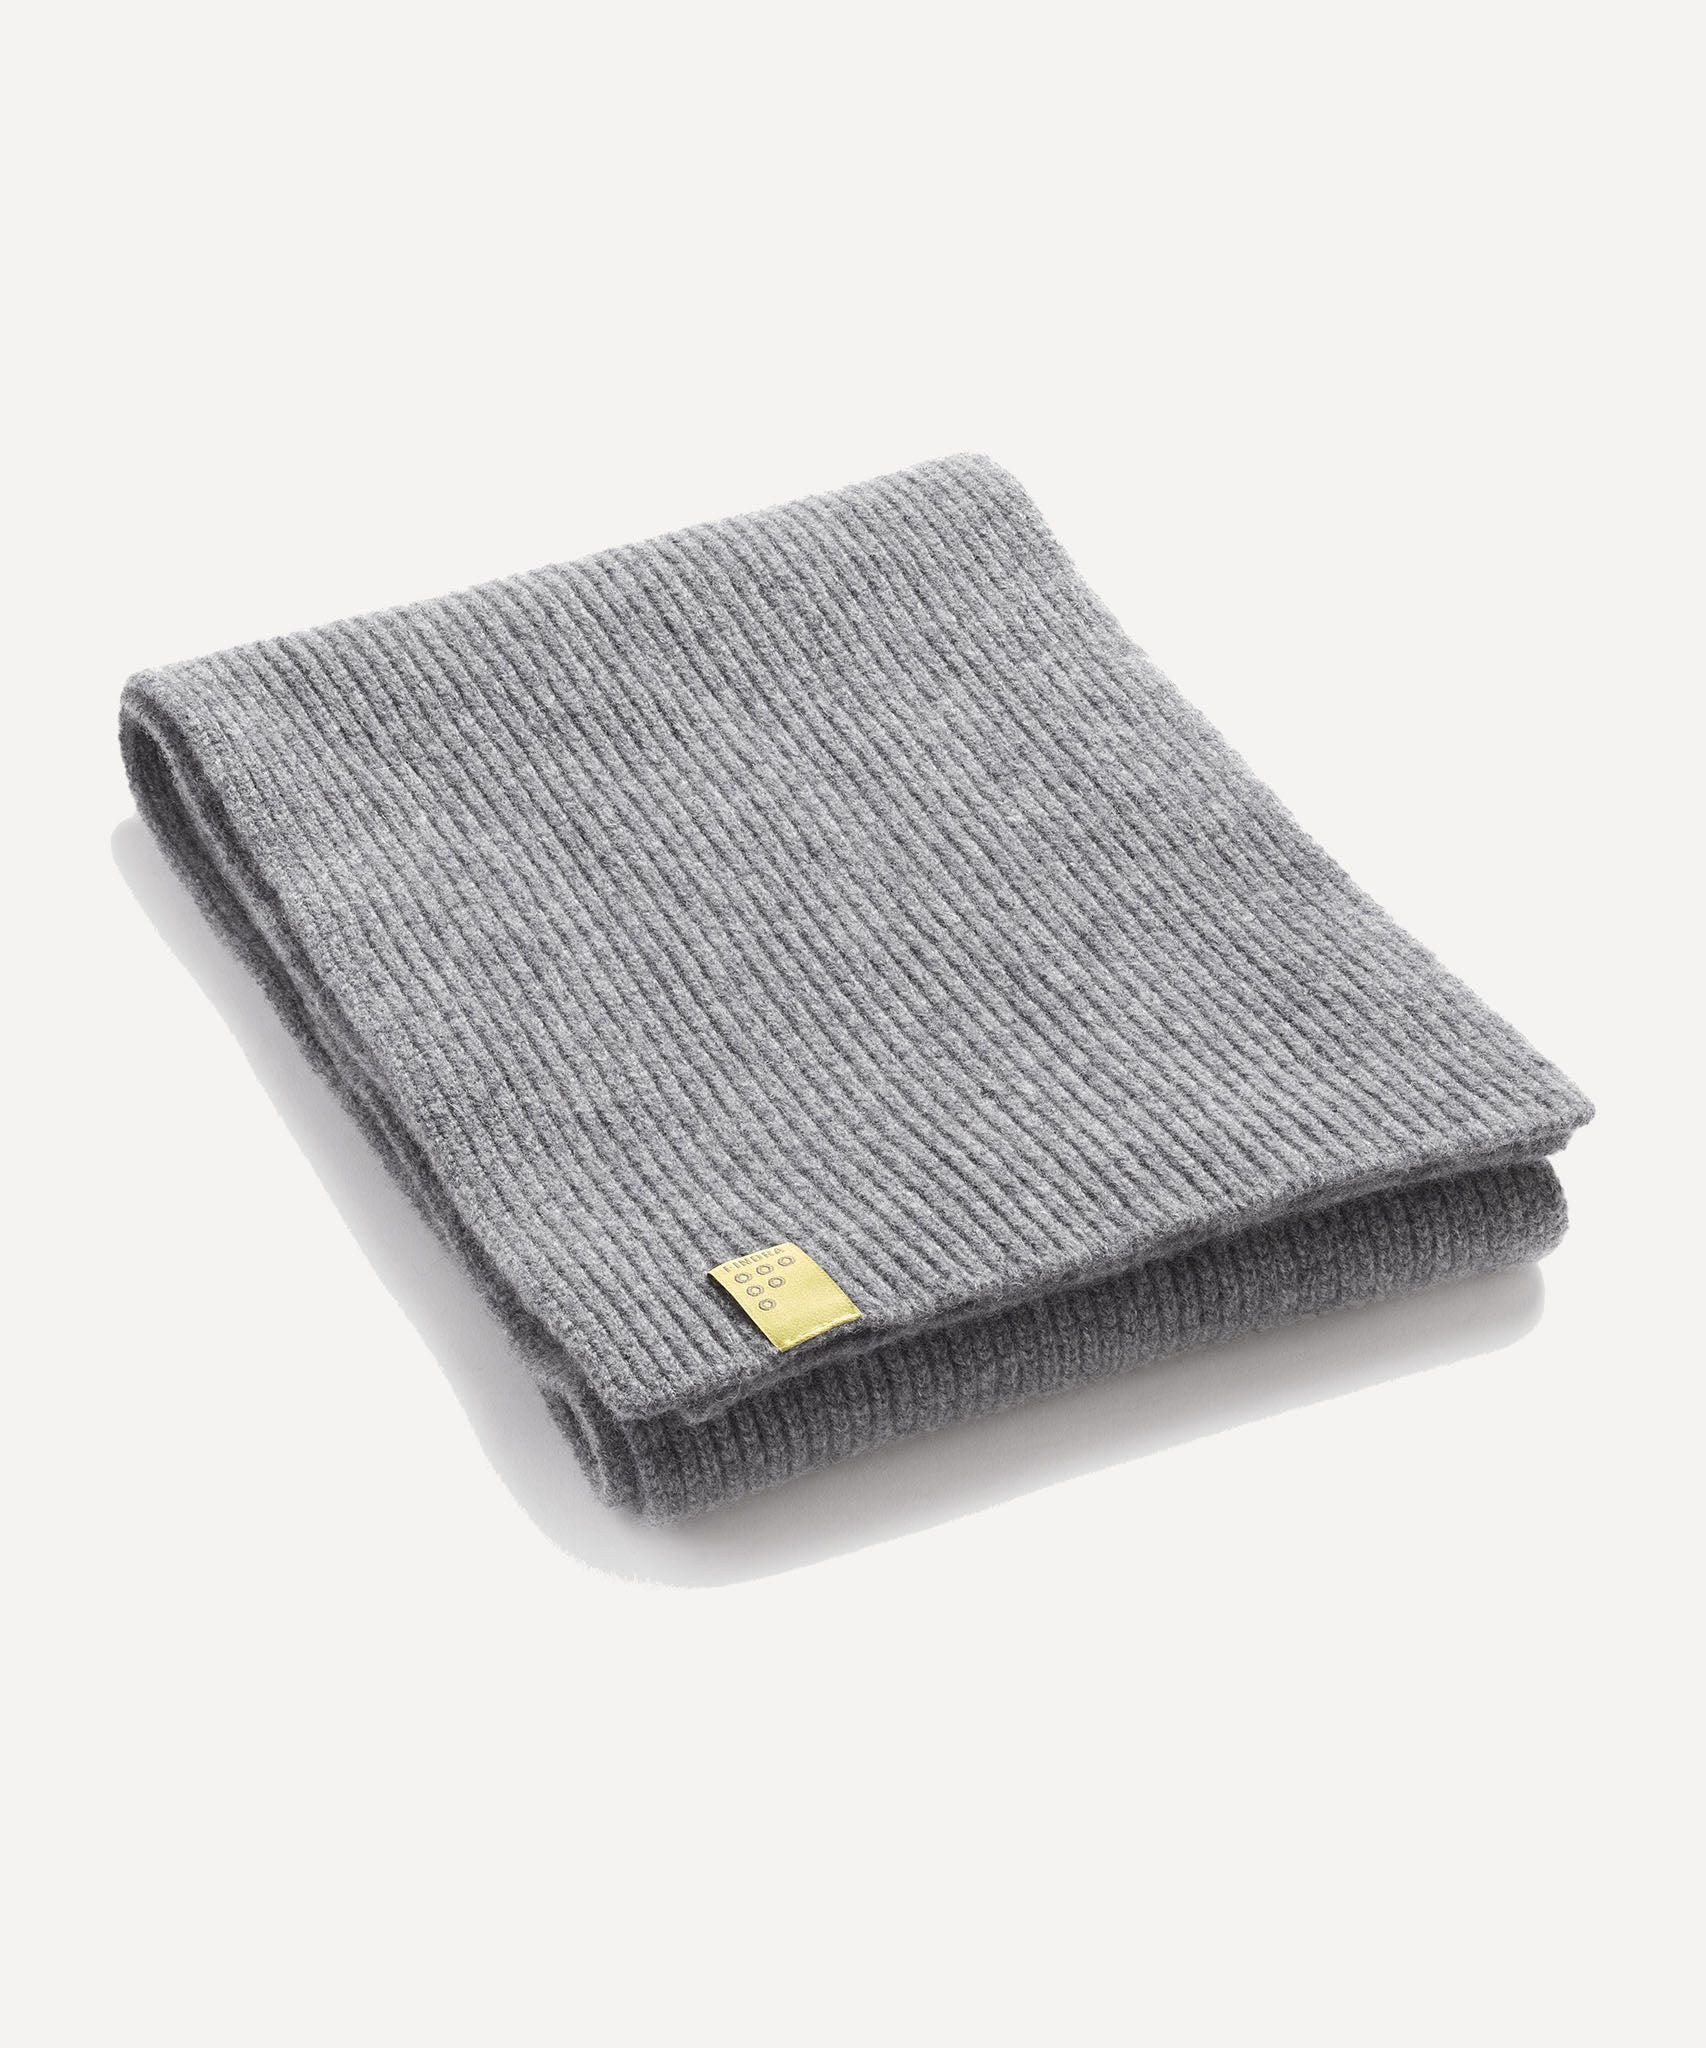 URBAN OUTFITTERS GREY Rectangle Scarf L70” x W16” One Size Fits Most OSFM  NWT £28.34 - PicClick UK